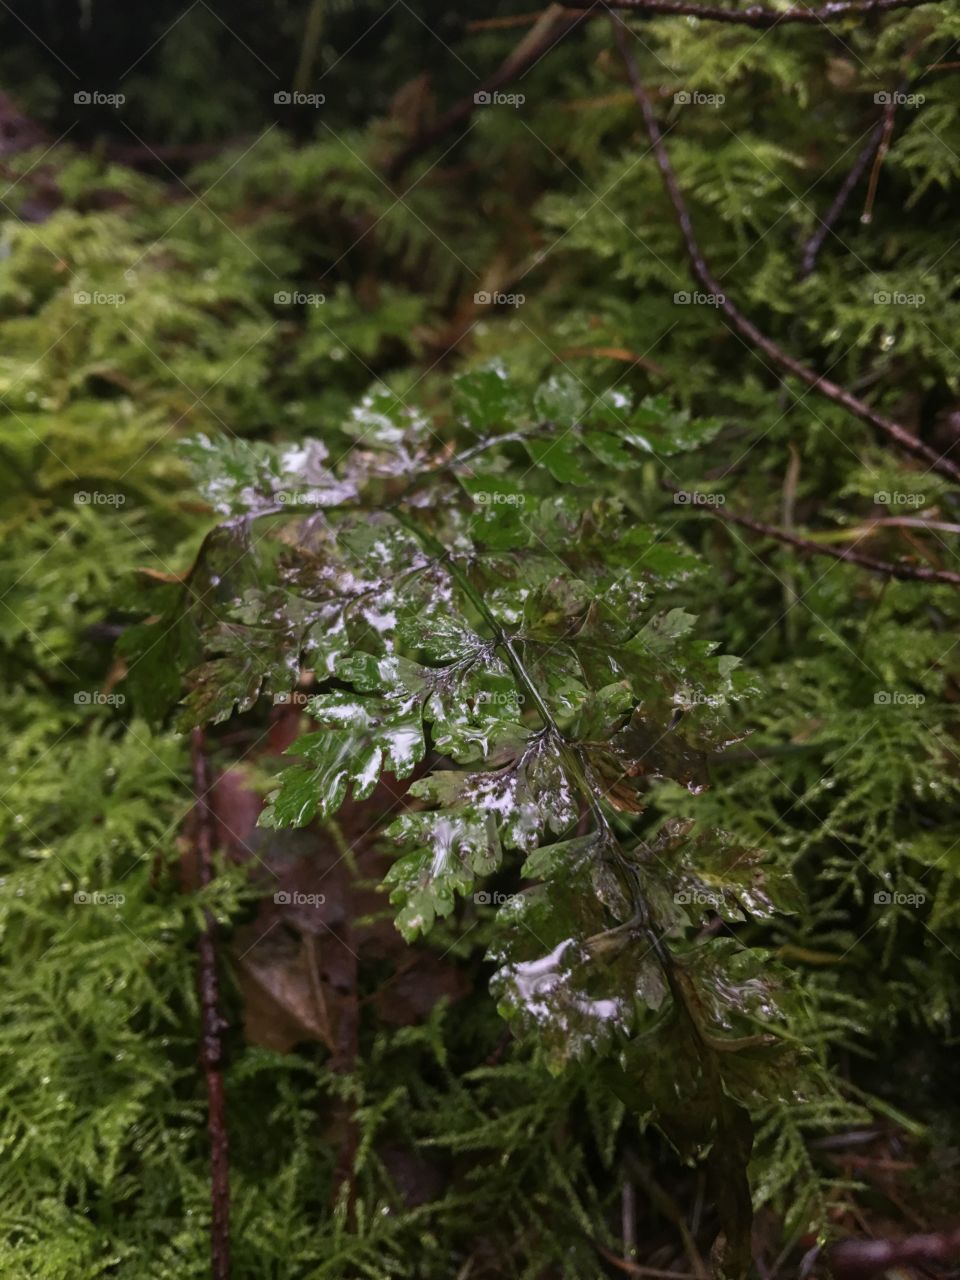 A wet fern growing on a mossy stump in the Pacific Northwest winter forest